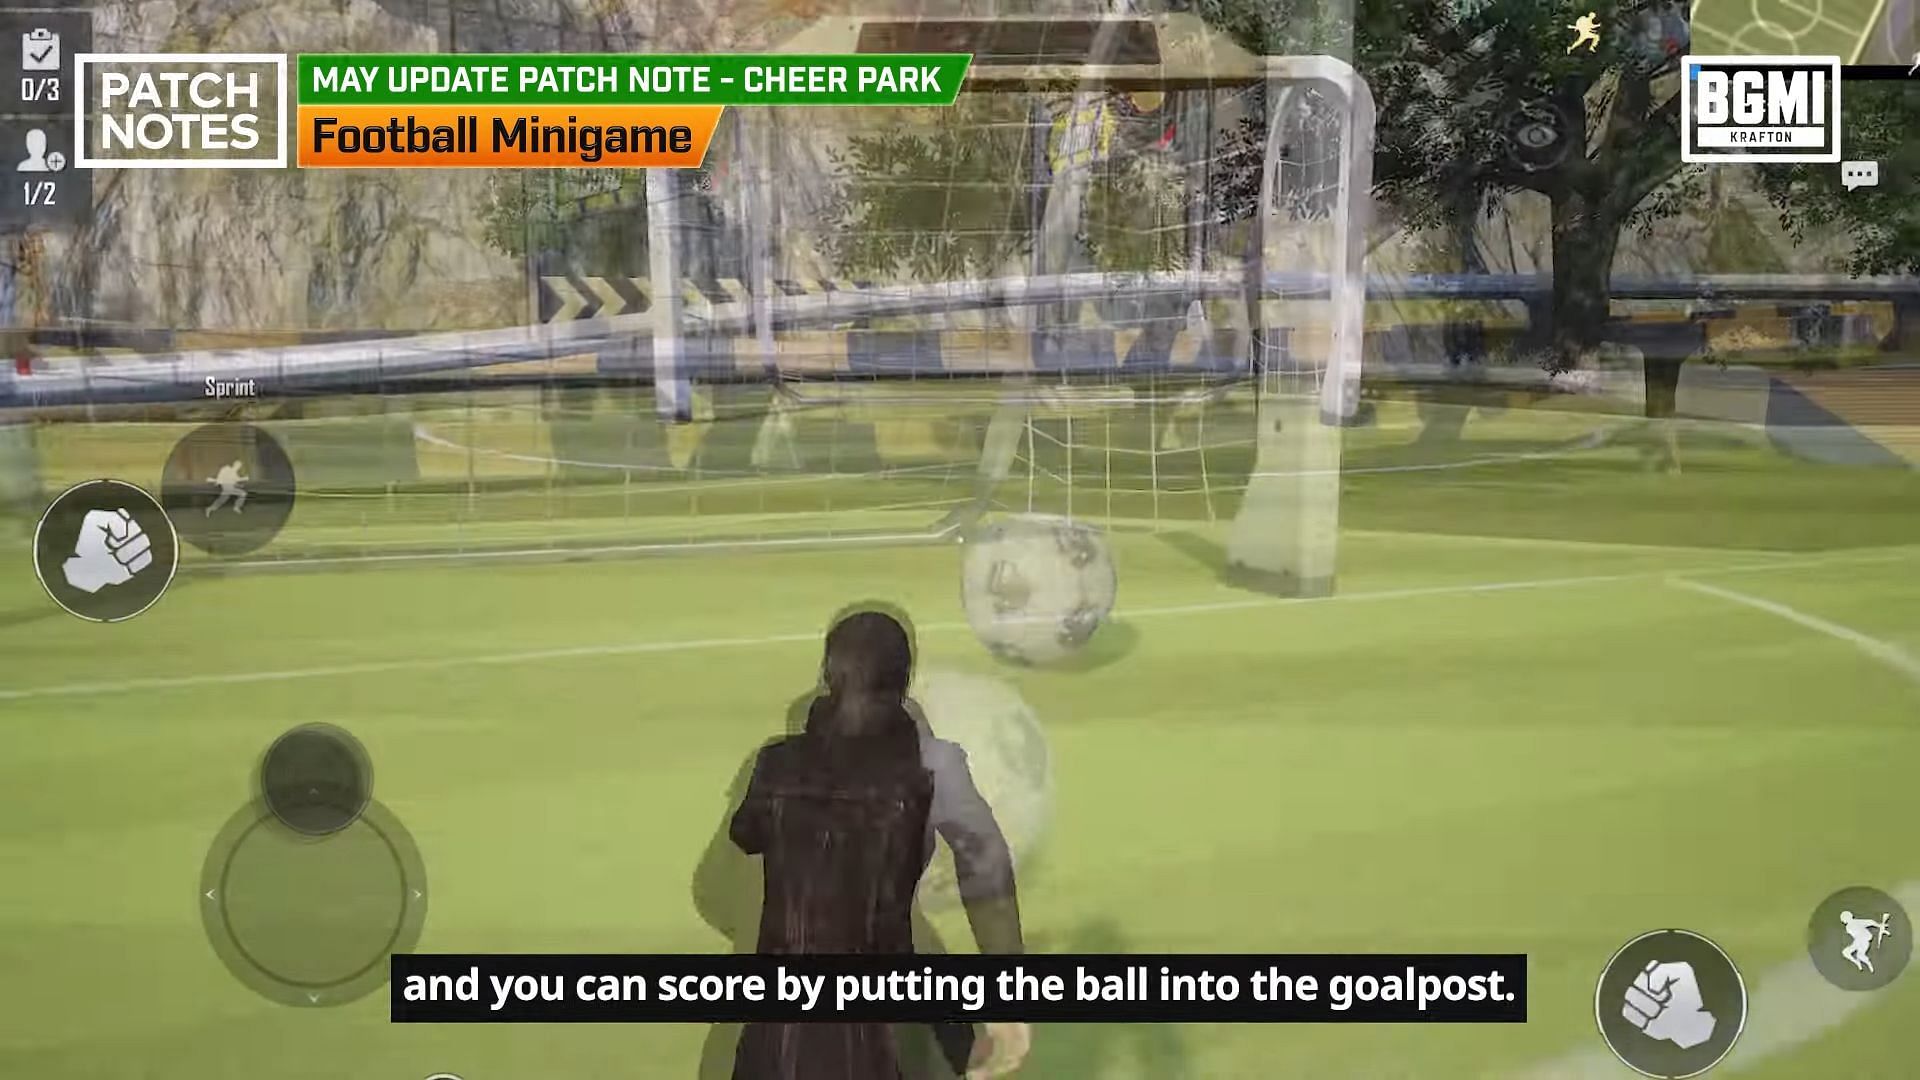 Football Minigame in the Cheer Park (Image via BGMI/YouTube))